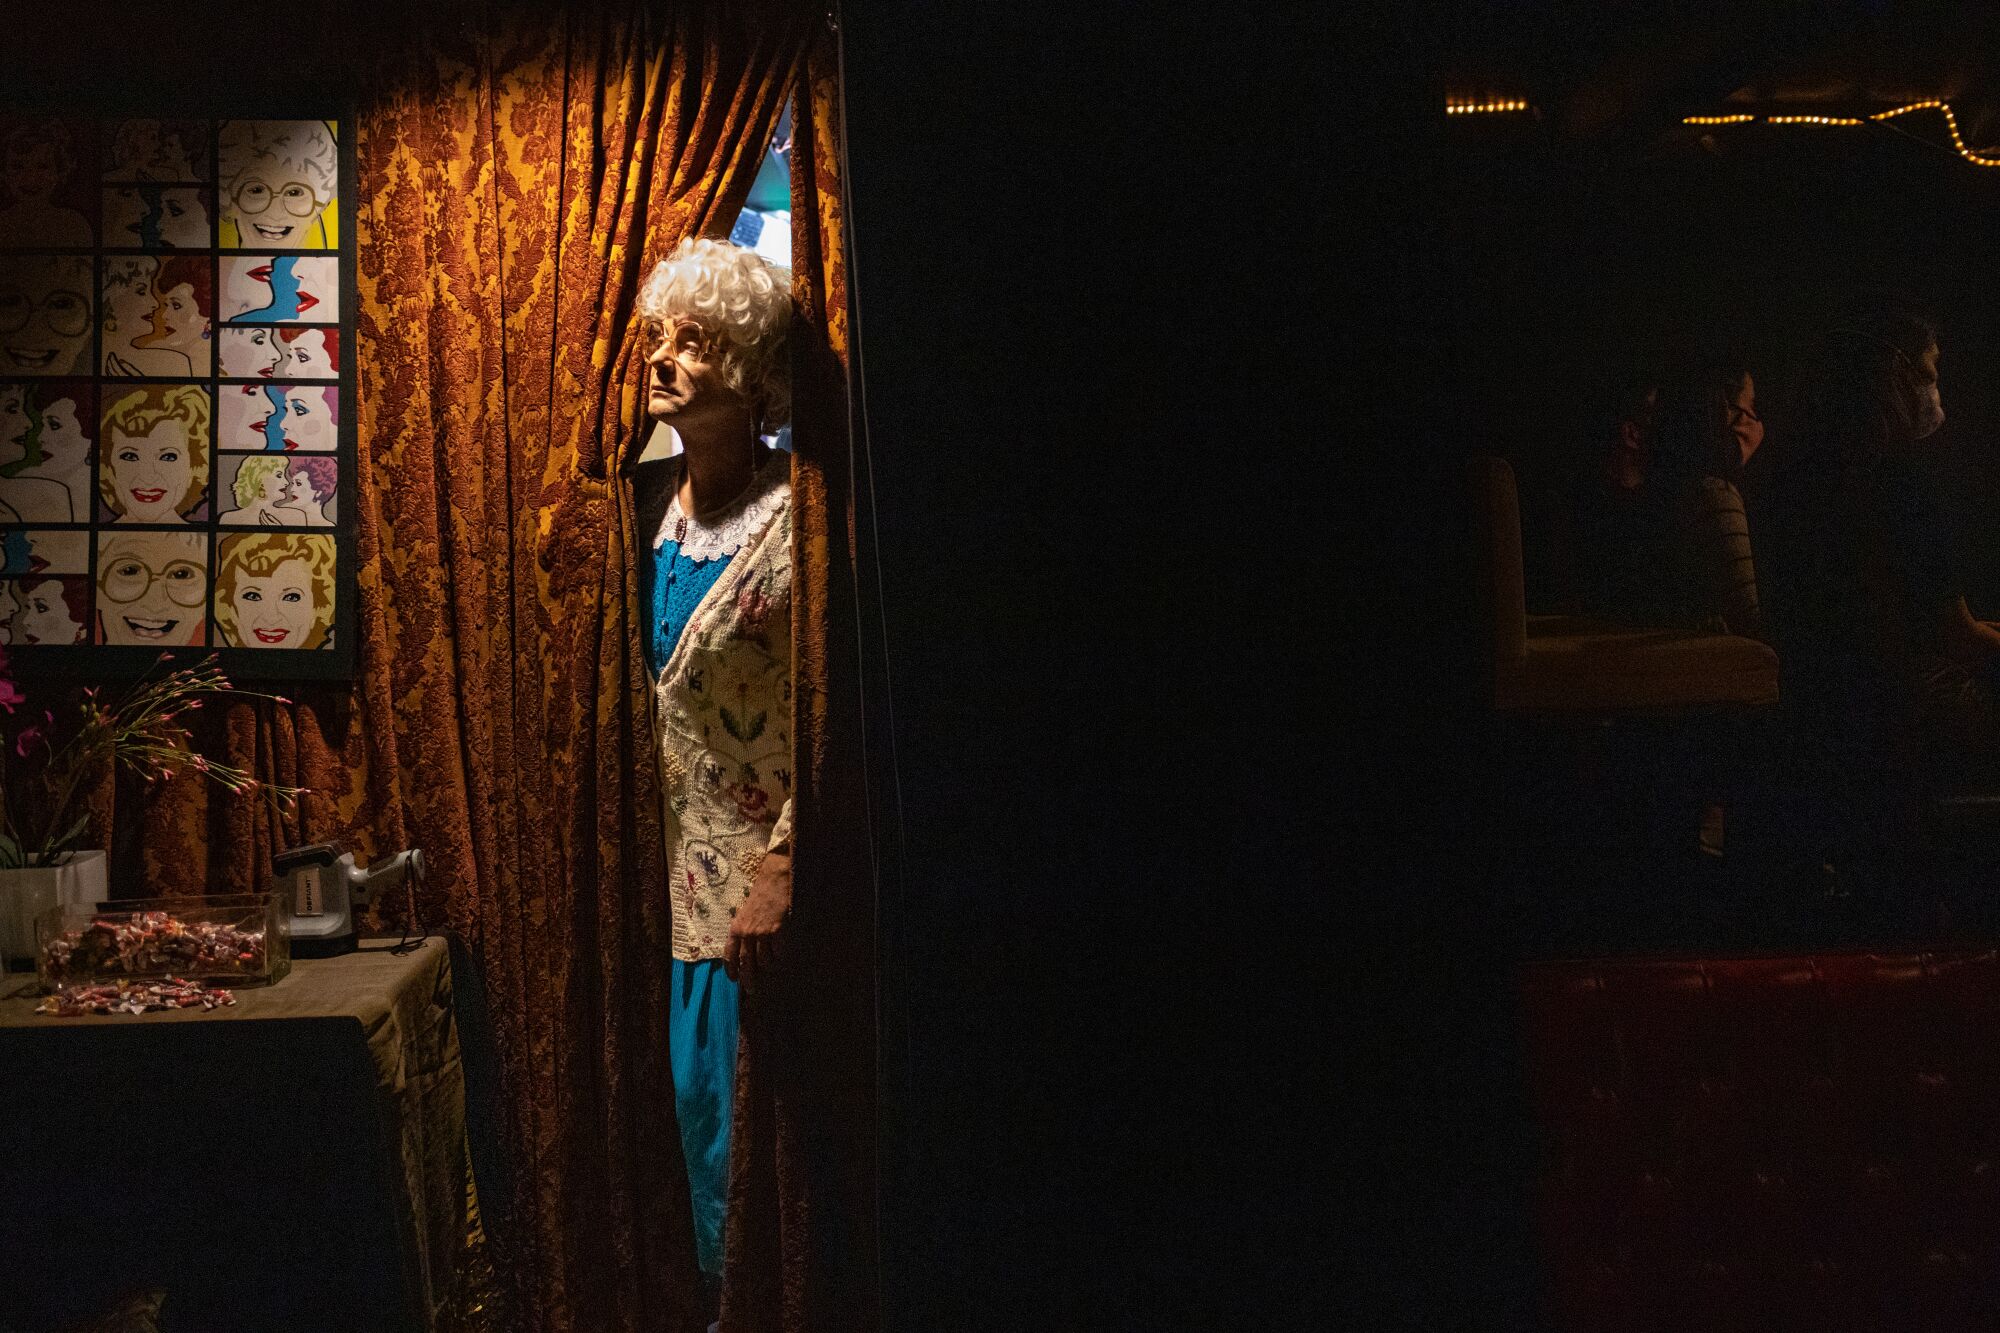 Sam Pancake, who played Sophia Petrillo, looks out from the curtain  backstage.